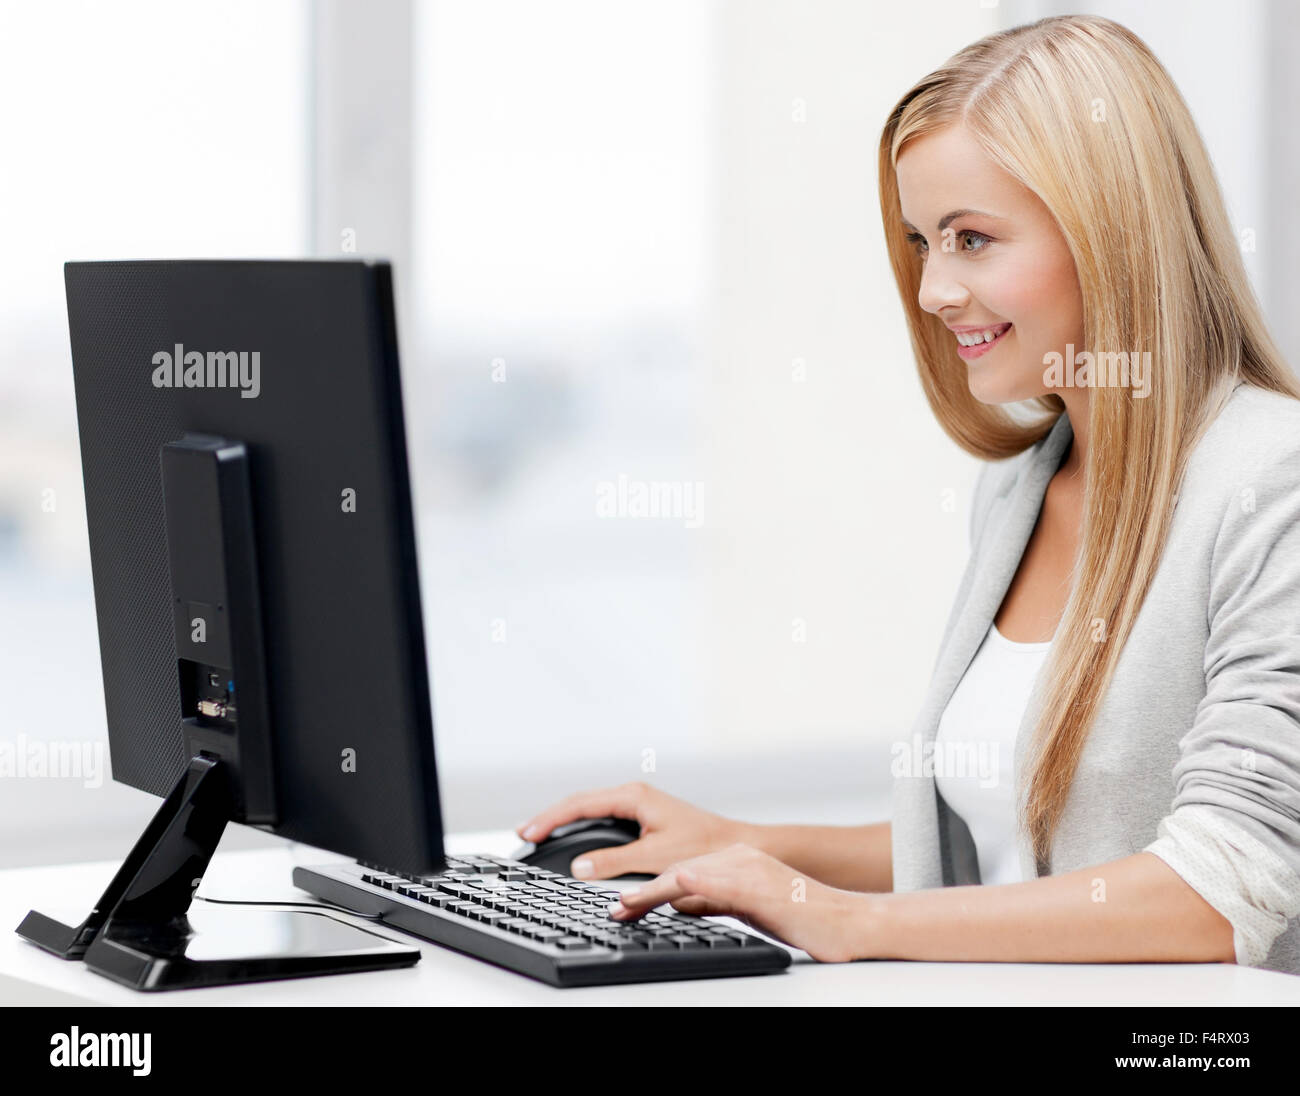 businesswoman with computer Stock Photo